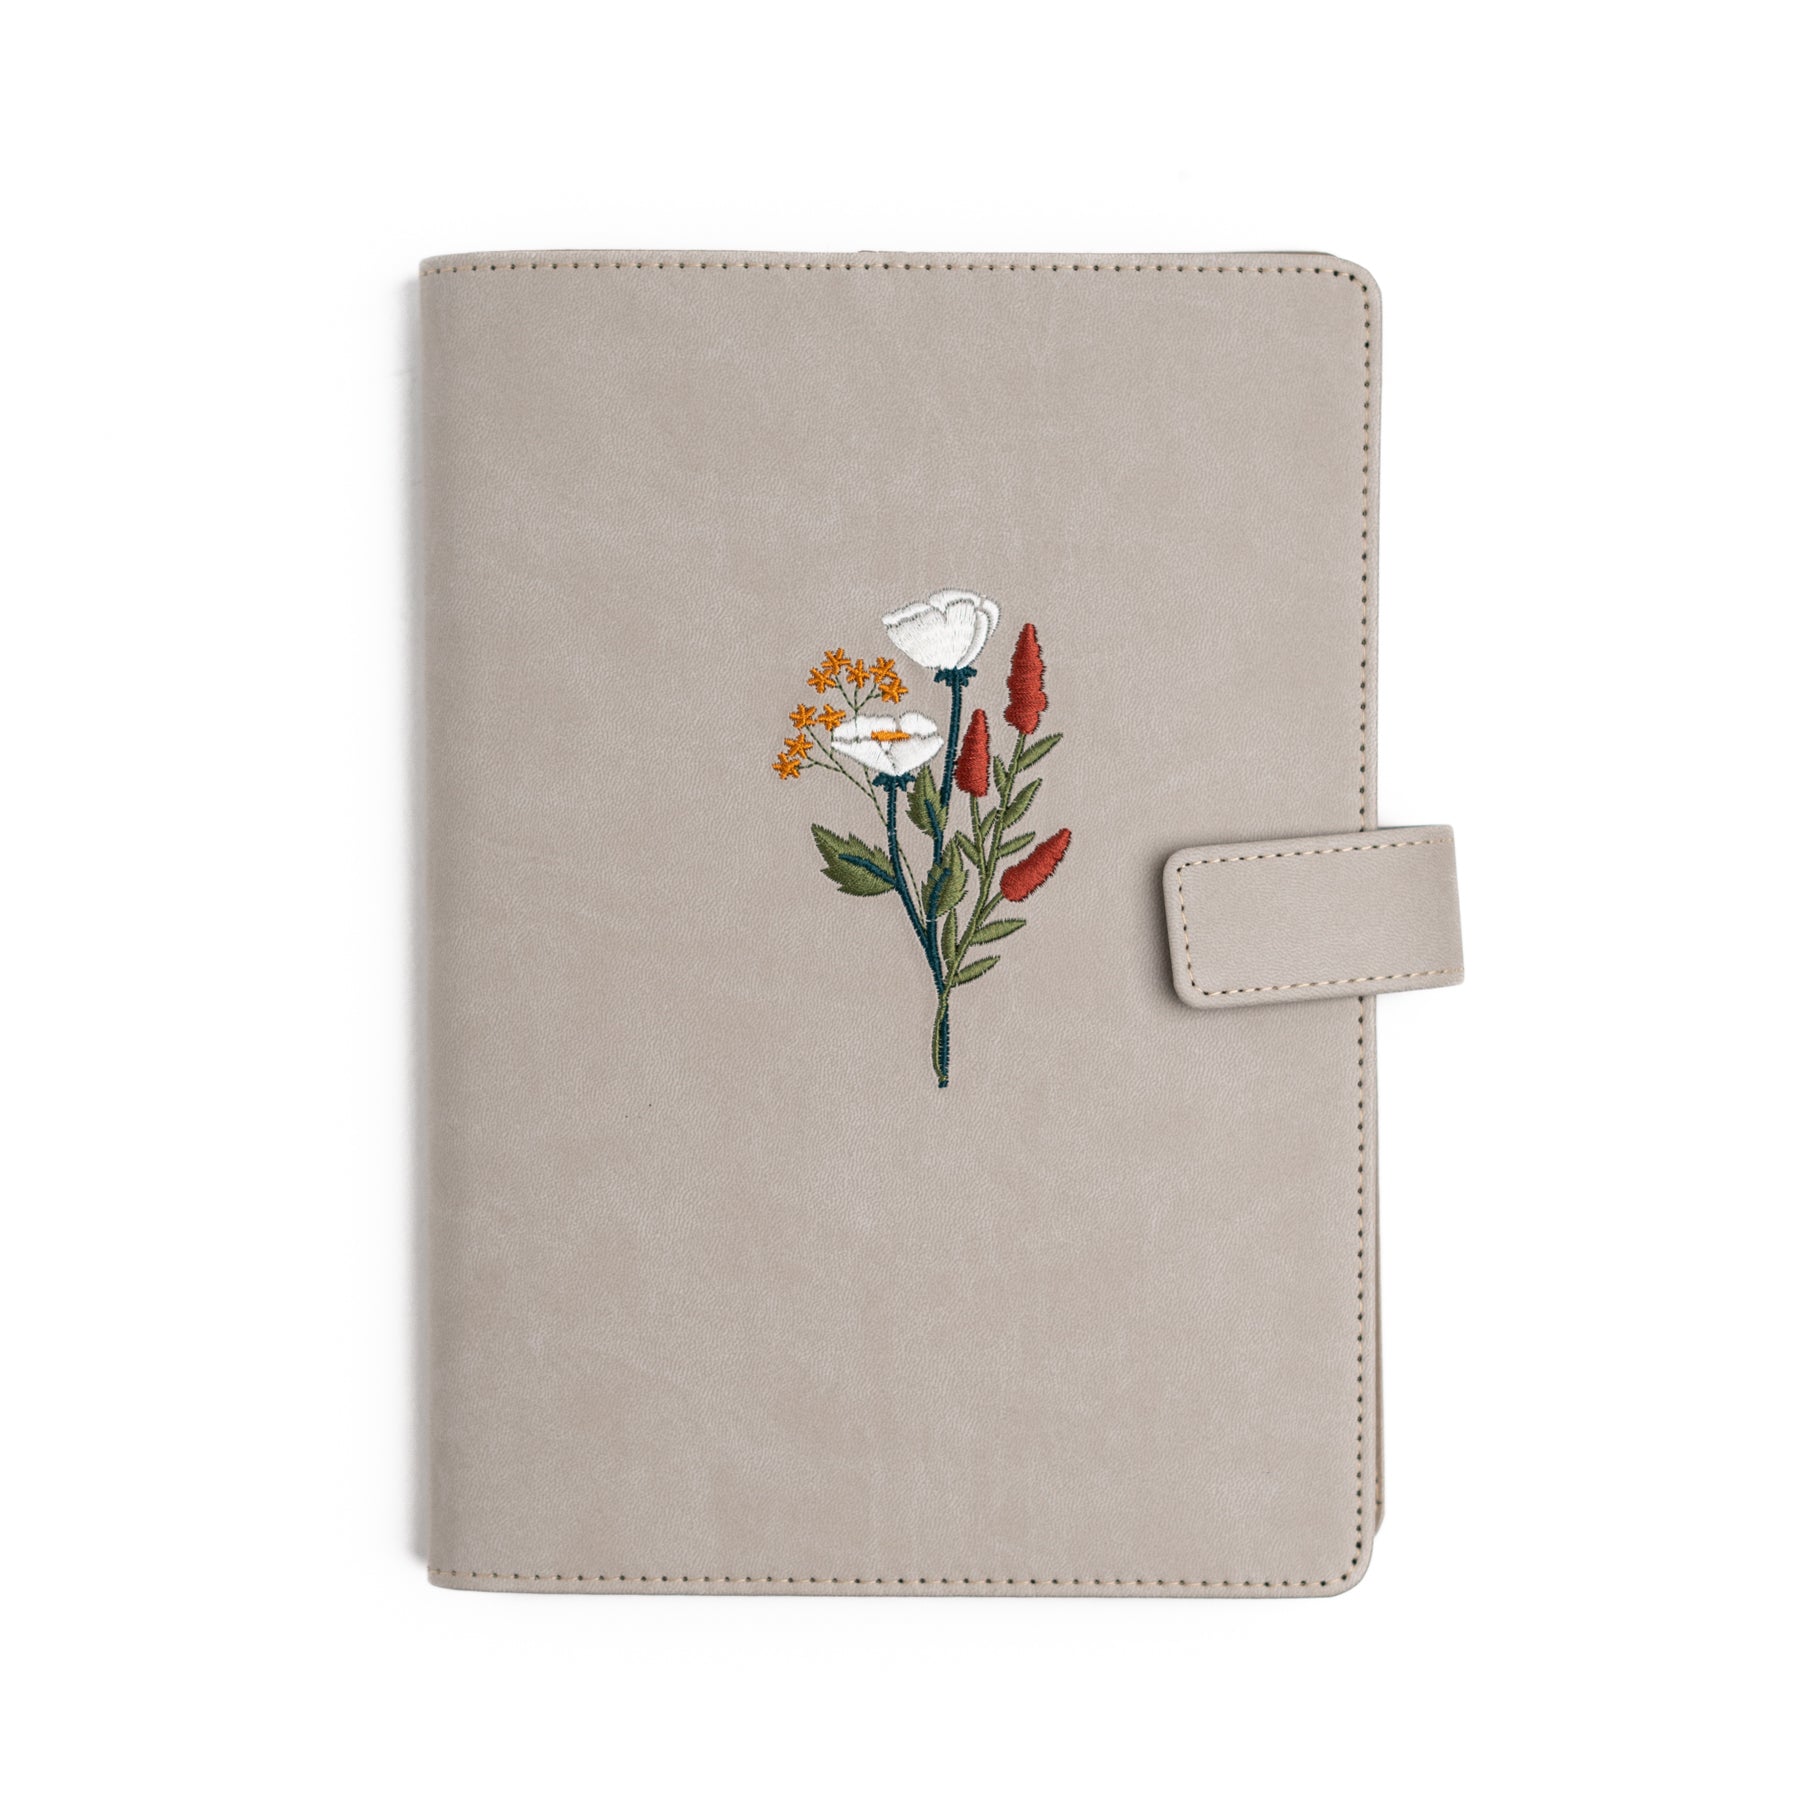 Embroidered Journal Cover